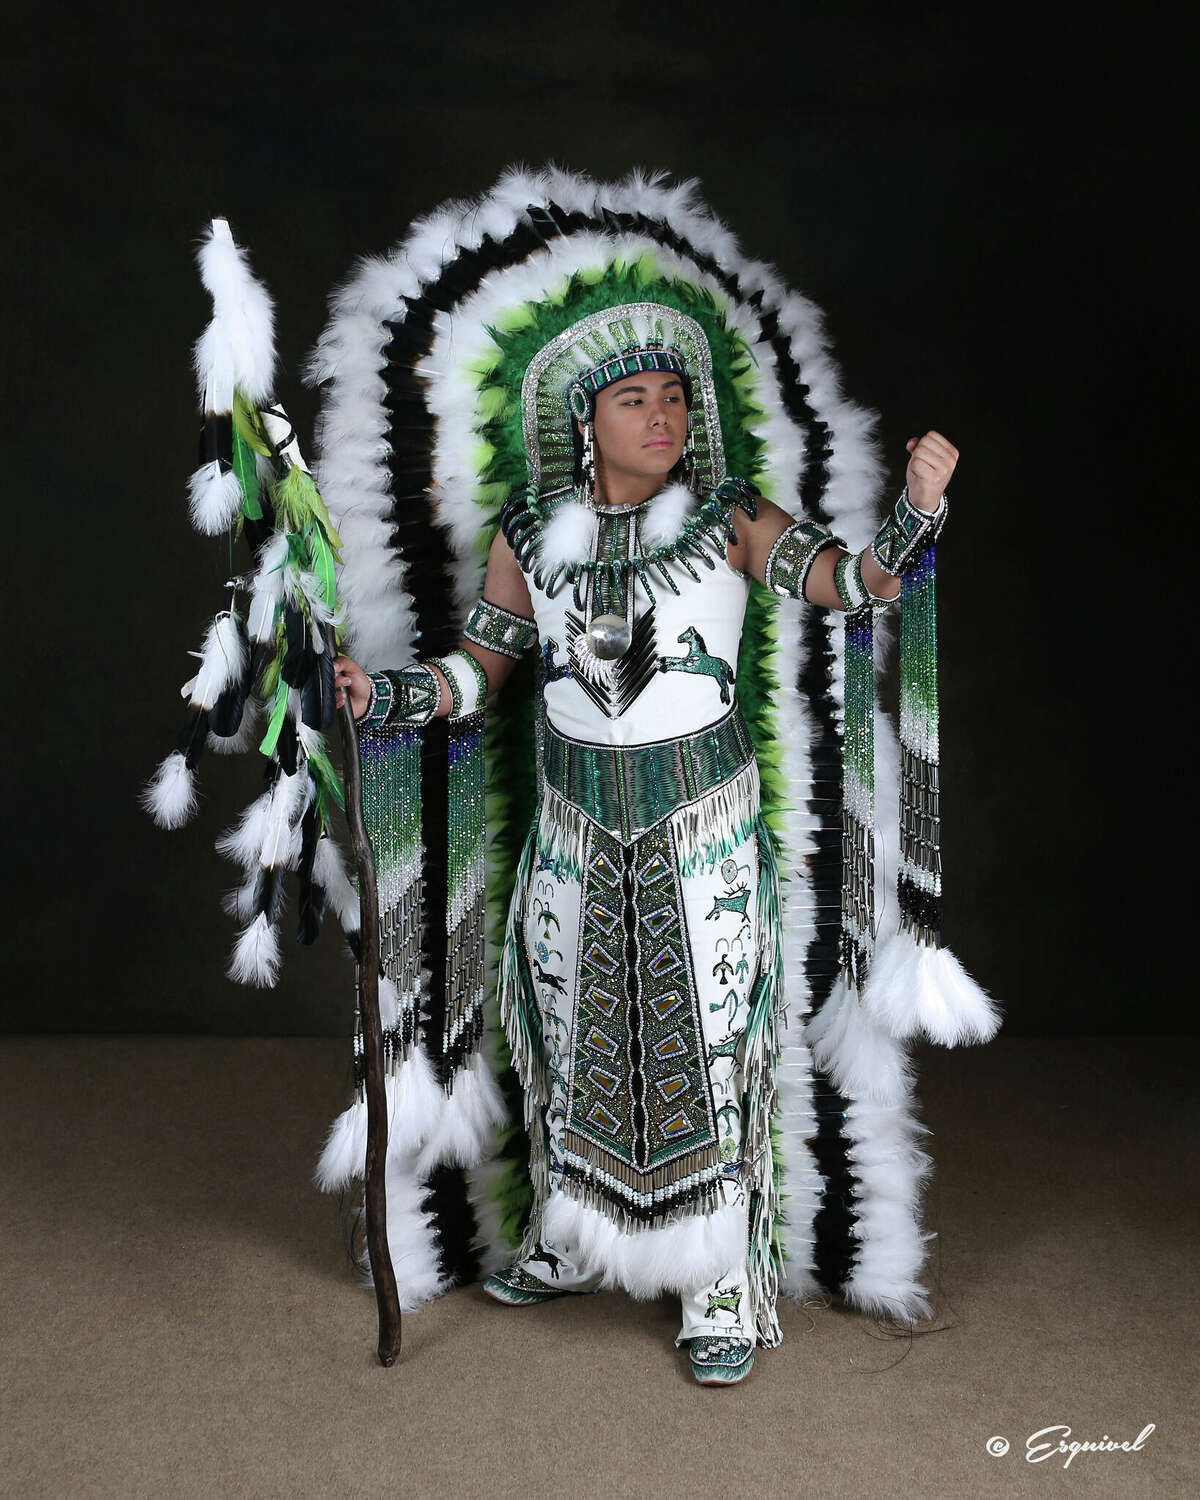 Ricardo Ferdin Jr is representing the Powhatan tribe as Peace Maker Chief of All Nations. 